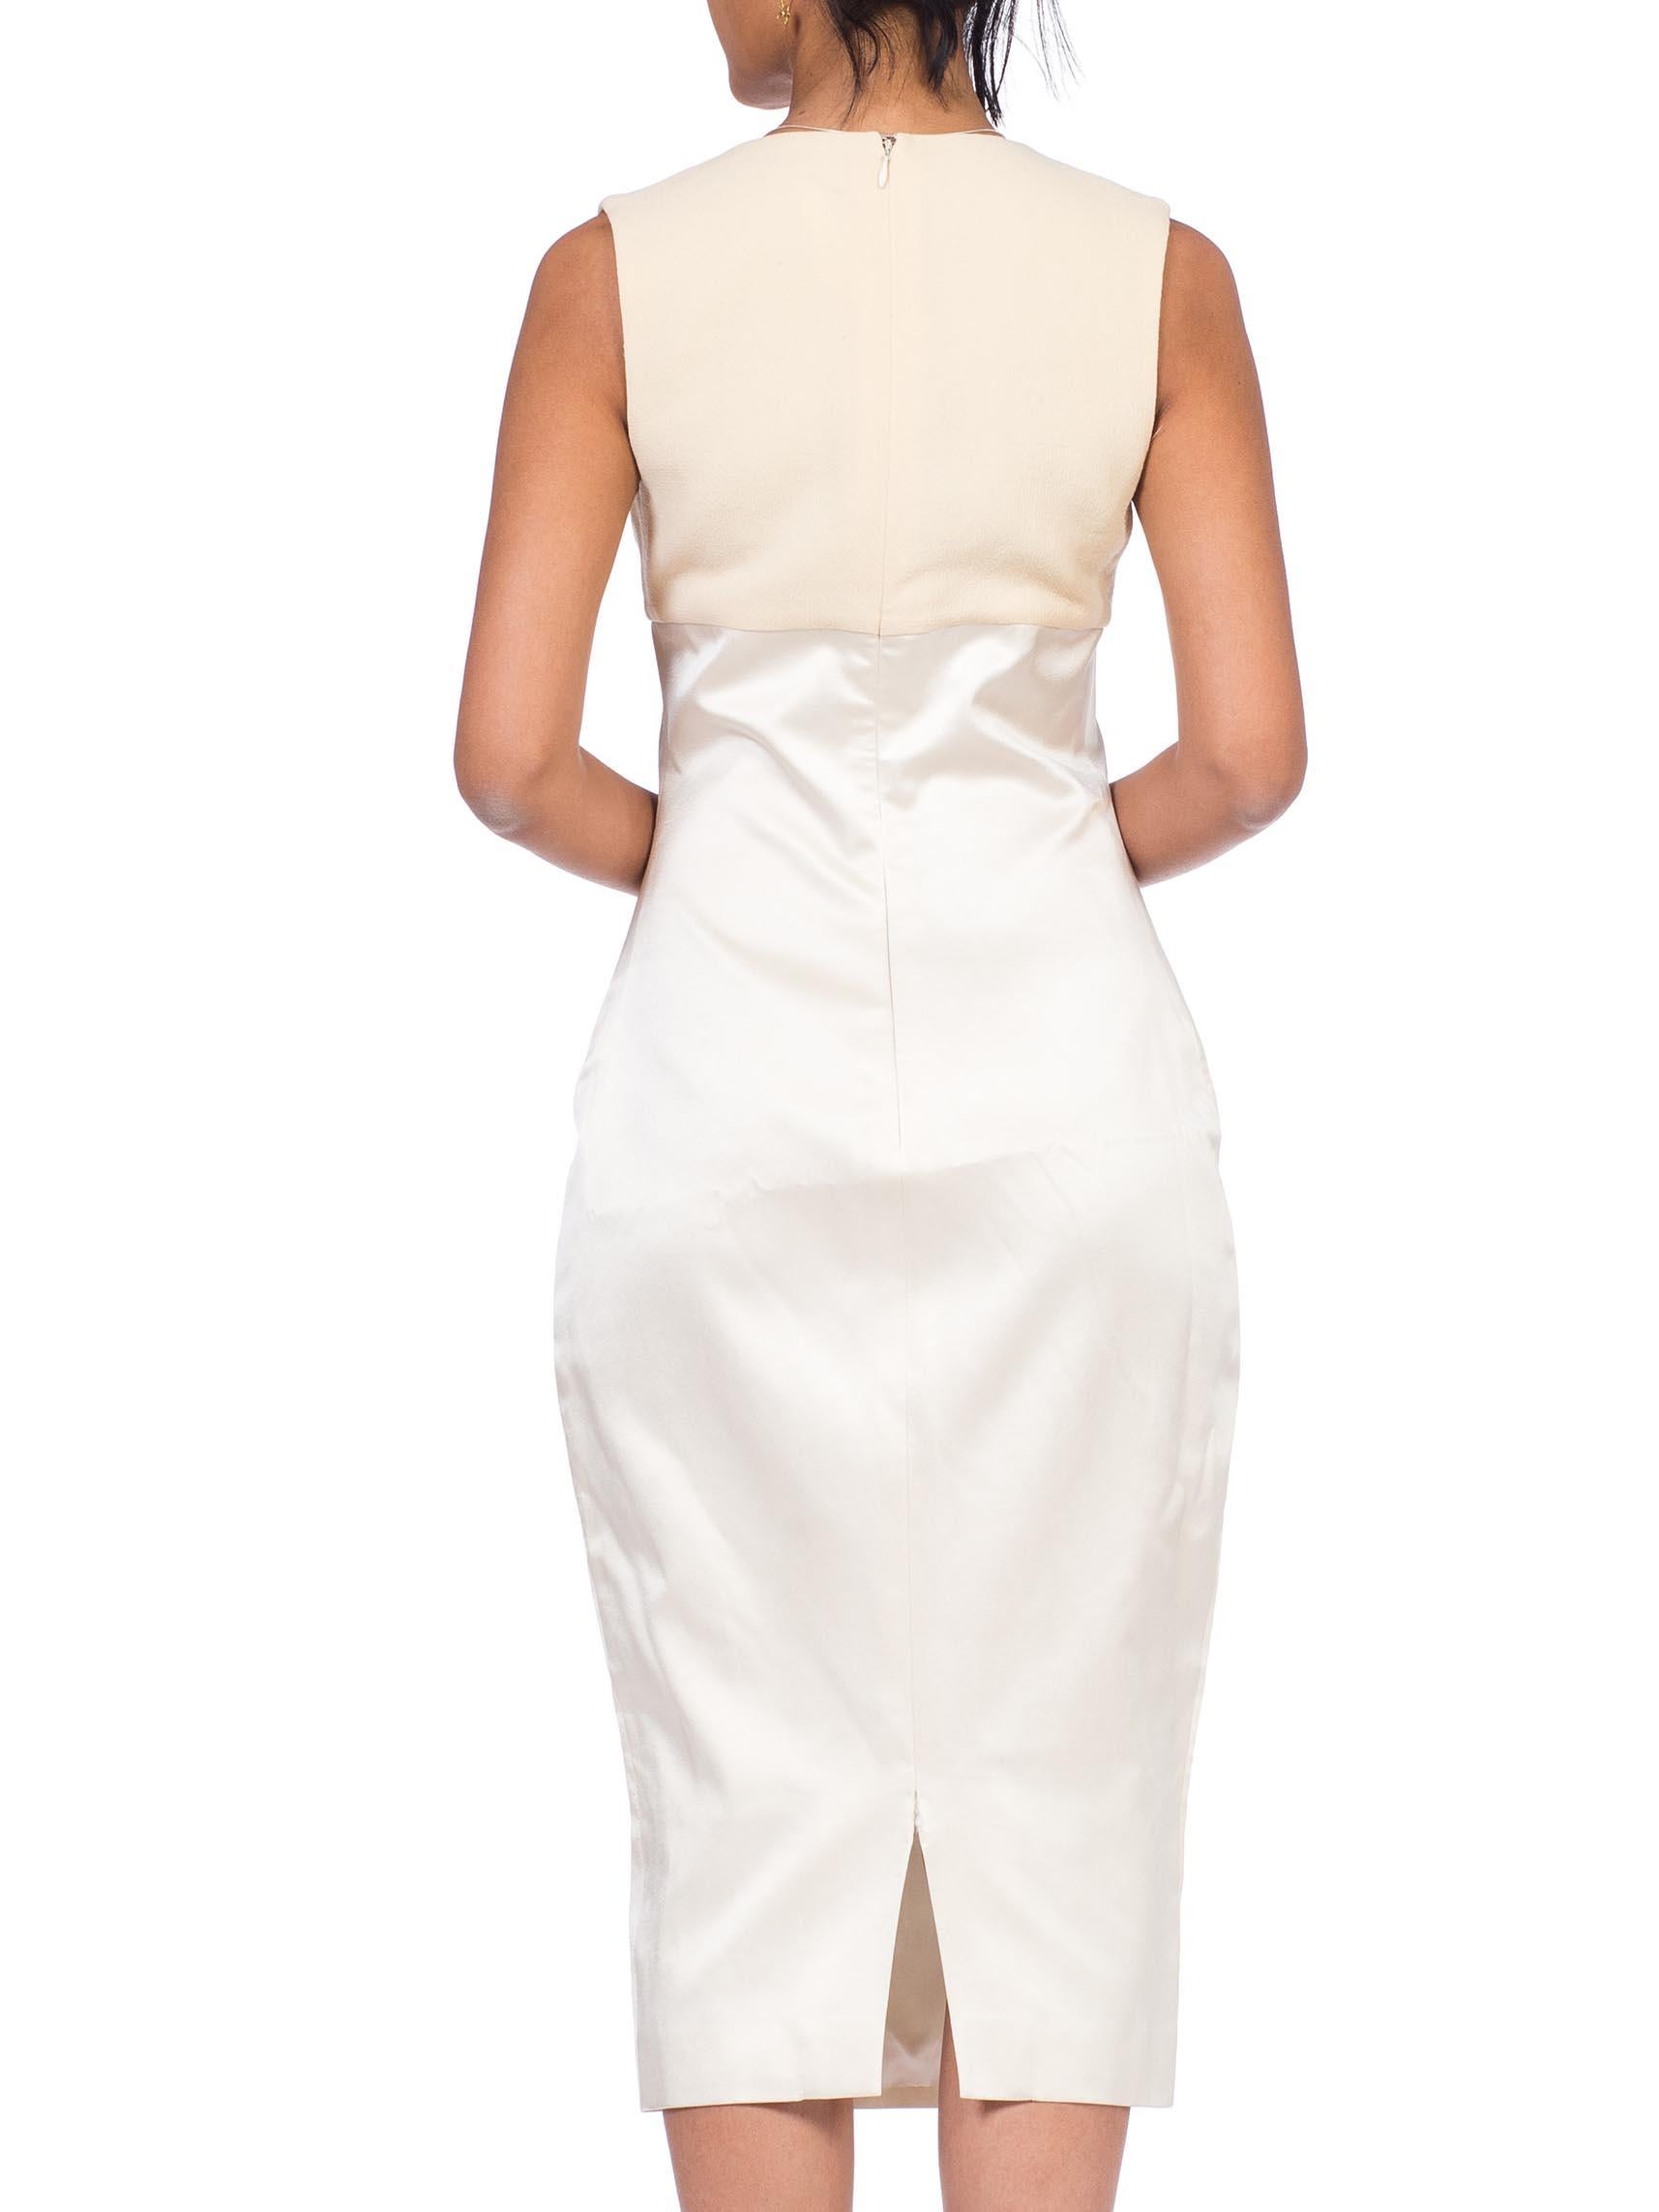 1990S GIANNI VERSACE Cream Silk Satin Sharply Fitted Dress With Stretch Wool At In Excellent Condition For Sale In New York, NY